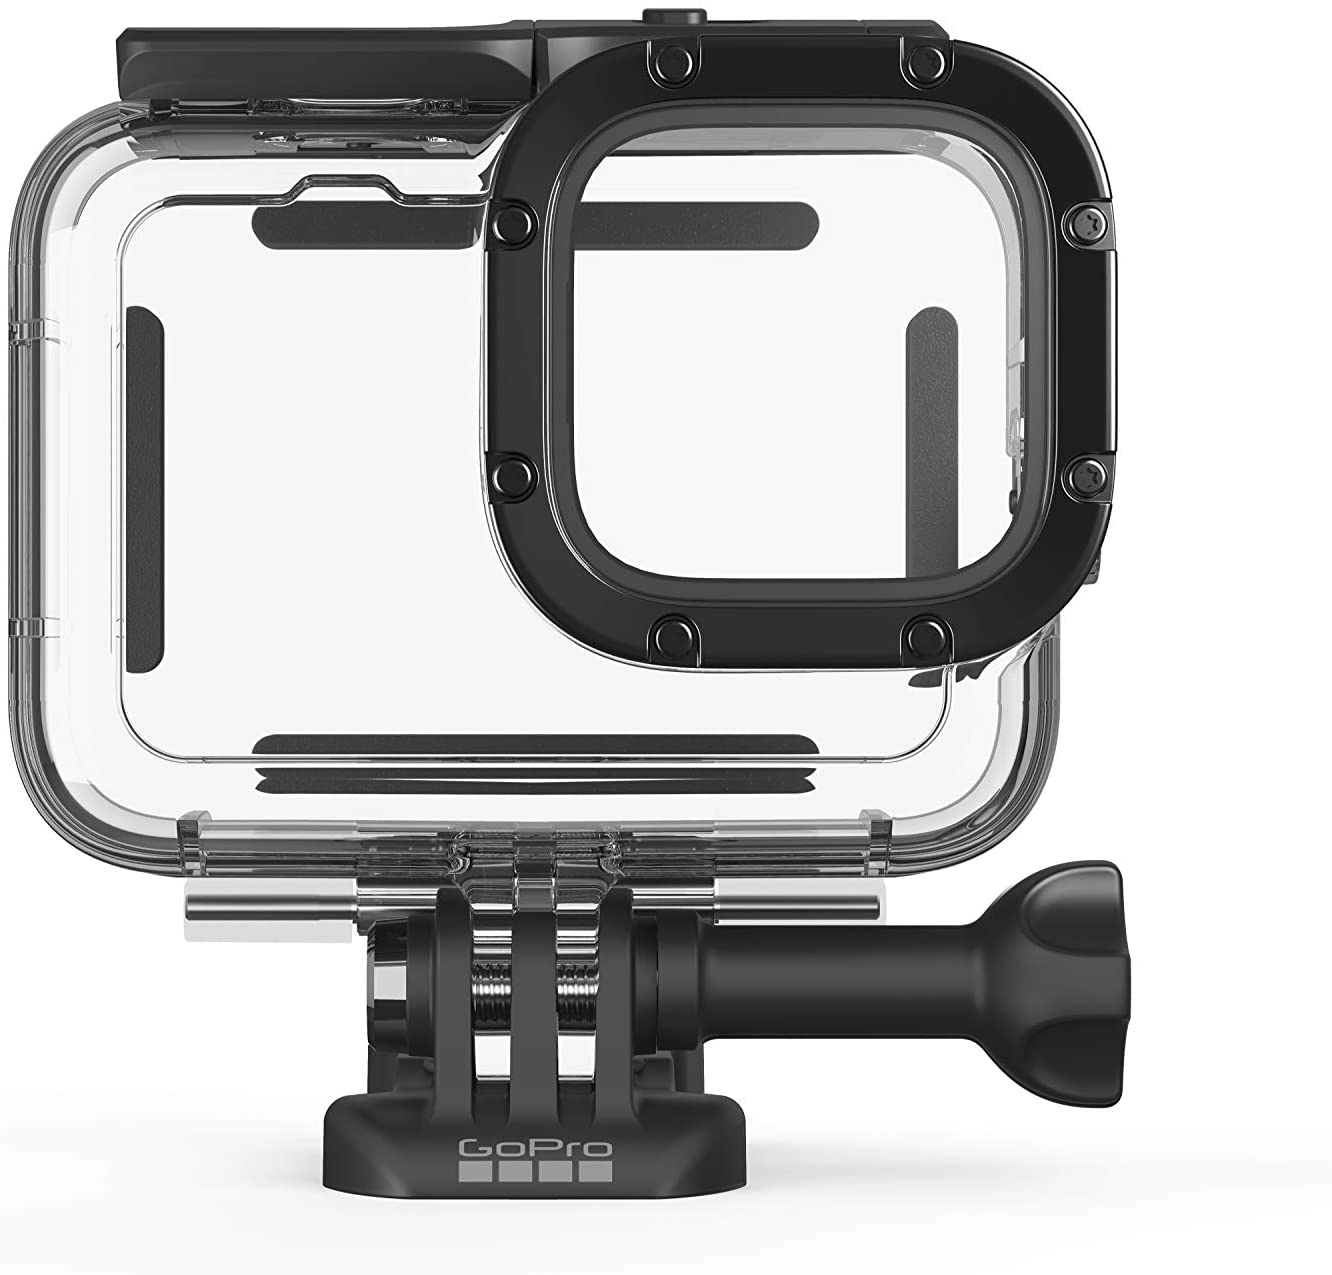 GoPro Protective Housing (HERO9, 10, 11, 12 Black) - is rugged and waterproof right out of the box, but this housing handles anything you can throw at it. It protects from dirt and flying debris, and it’s waterproof down to 60m for deep-water diving.